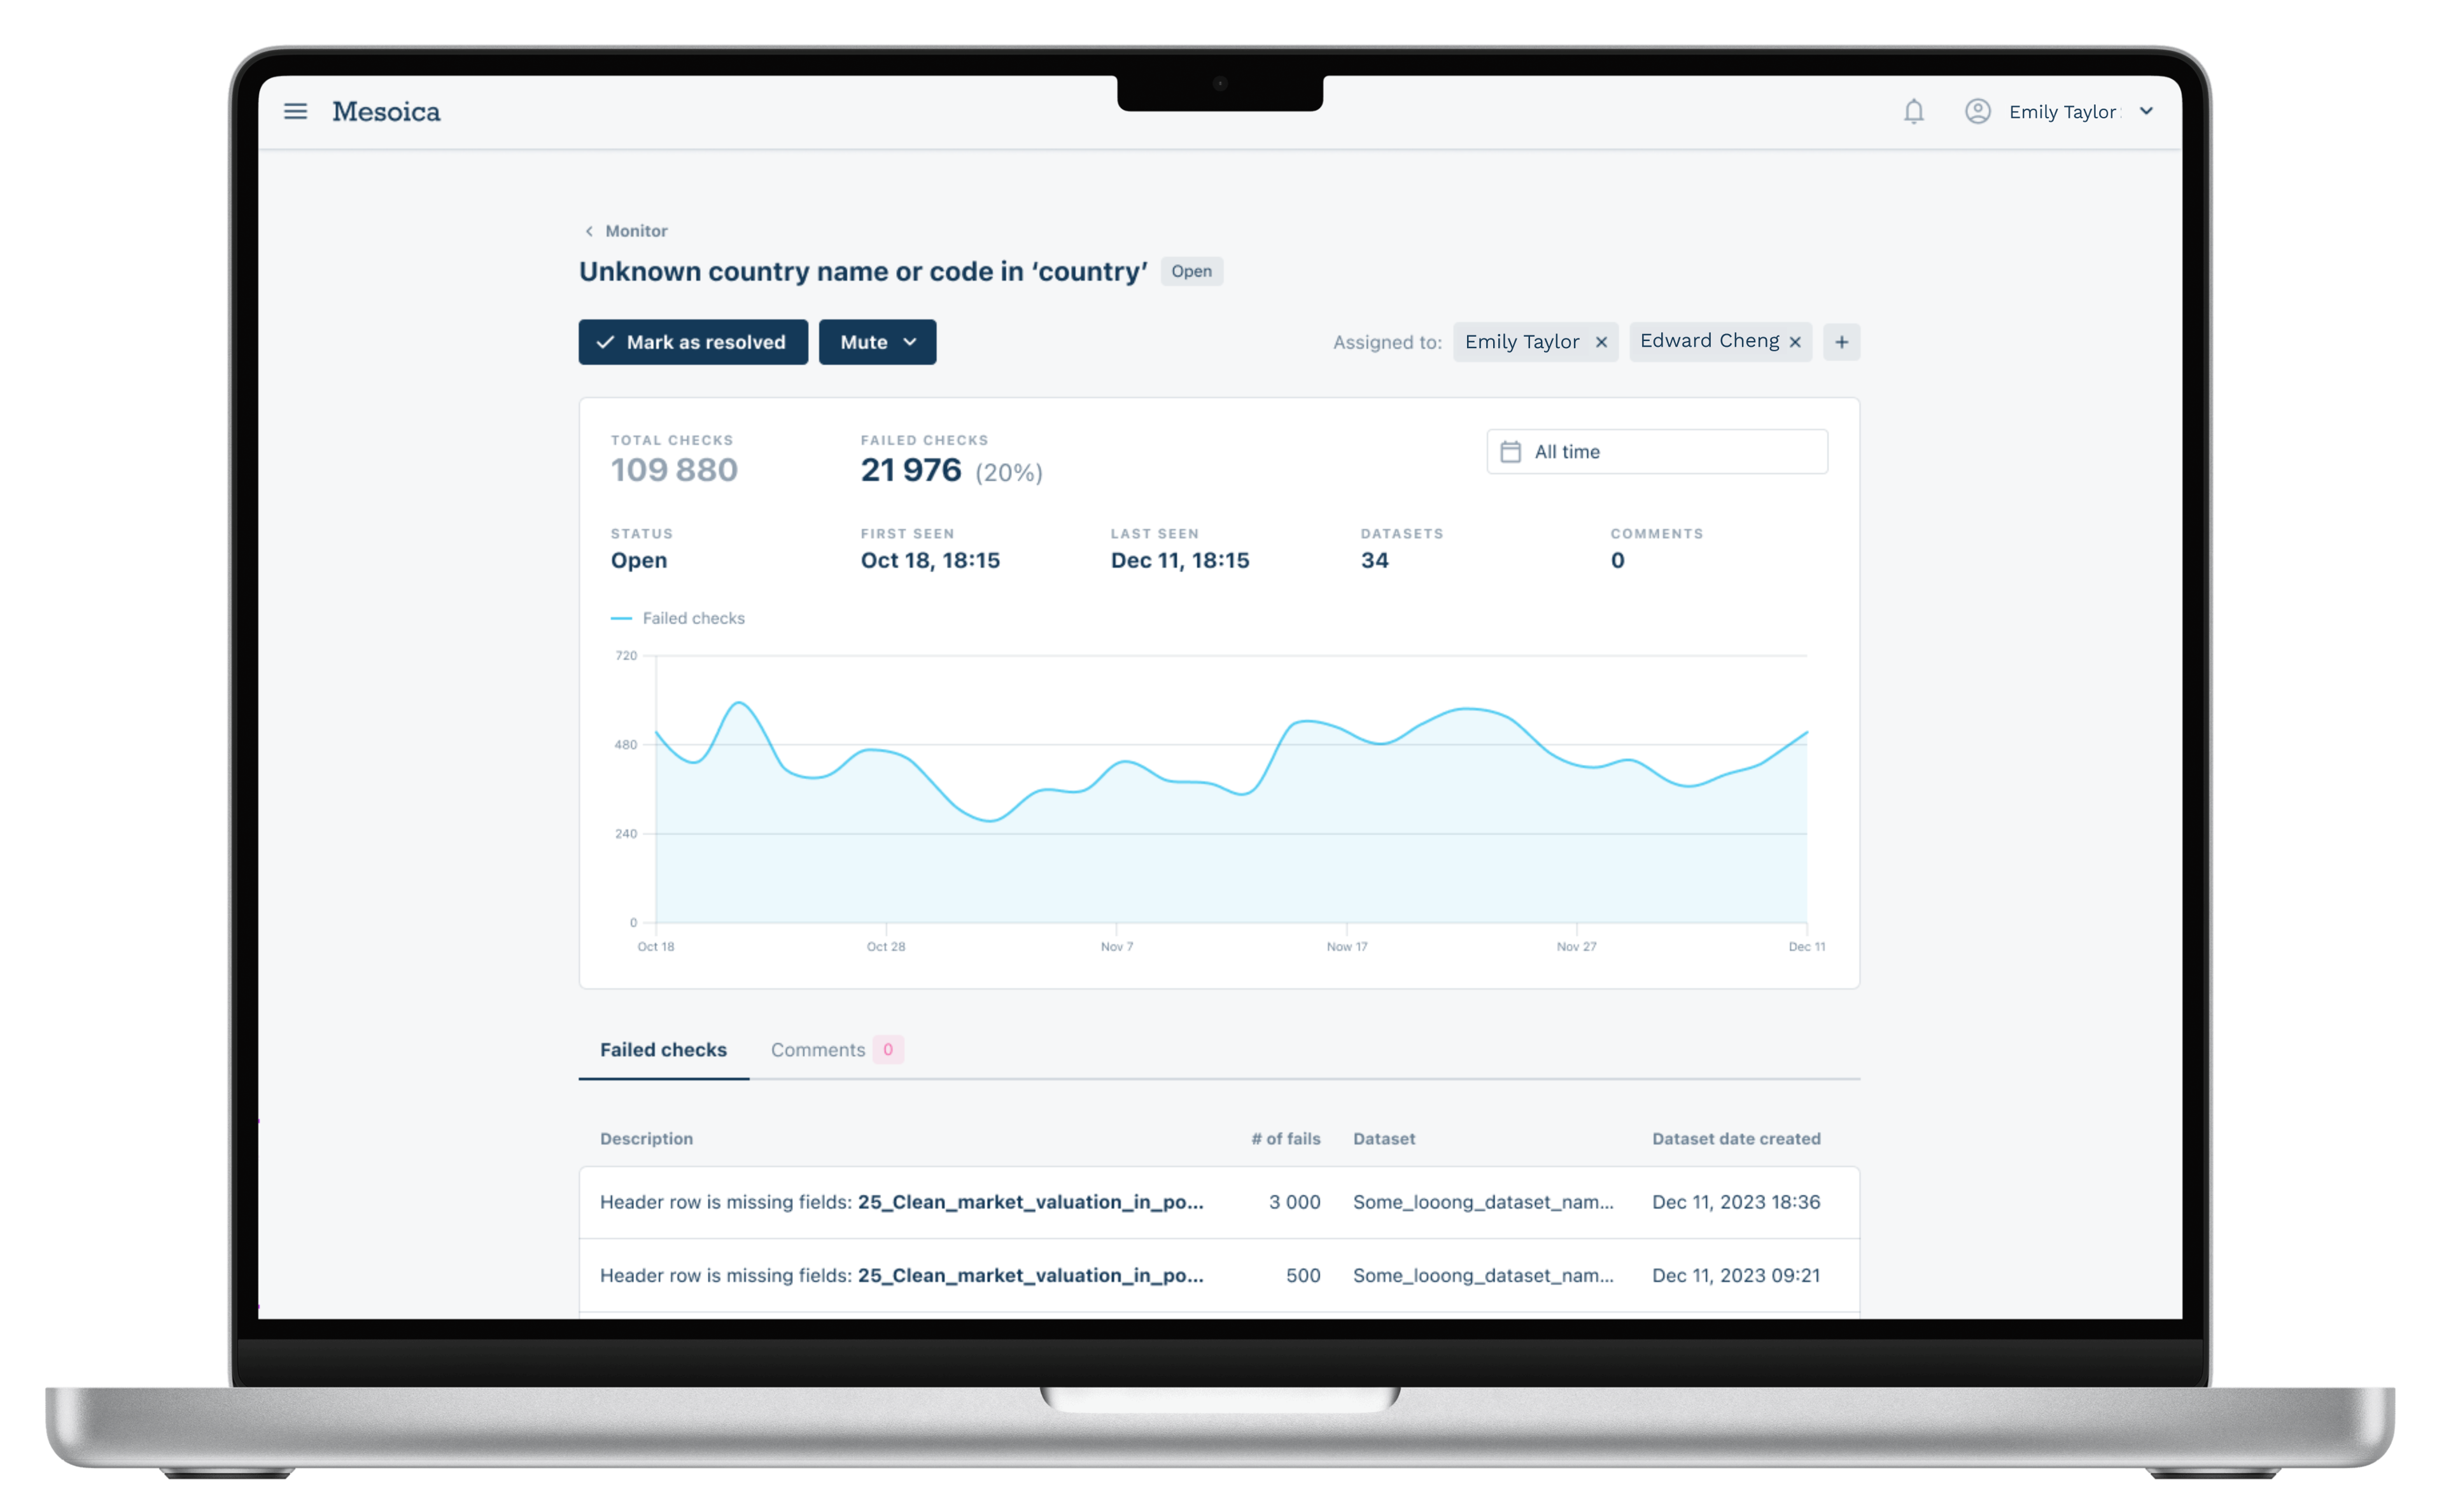 Mesoica's data quality monitor